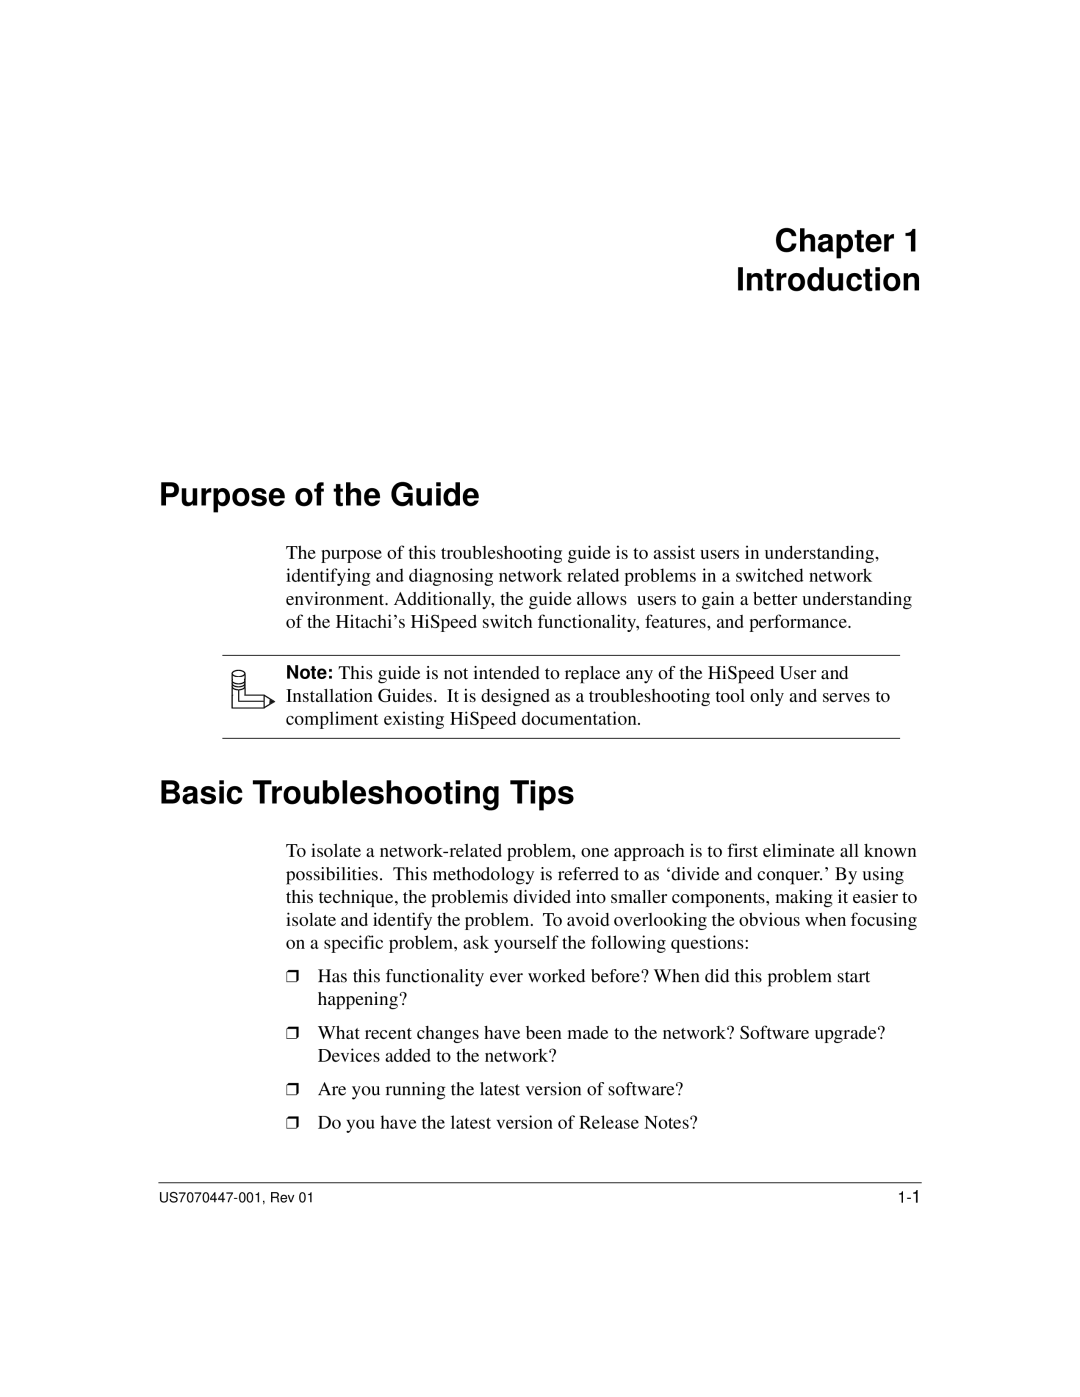 Hitachi US7070447-001 manual Chapter Introduction Purpose of the Guide, Basic Troubleshooting Tips 